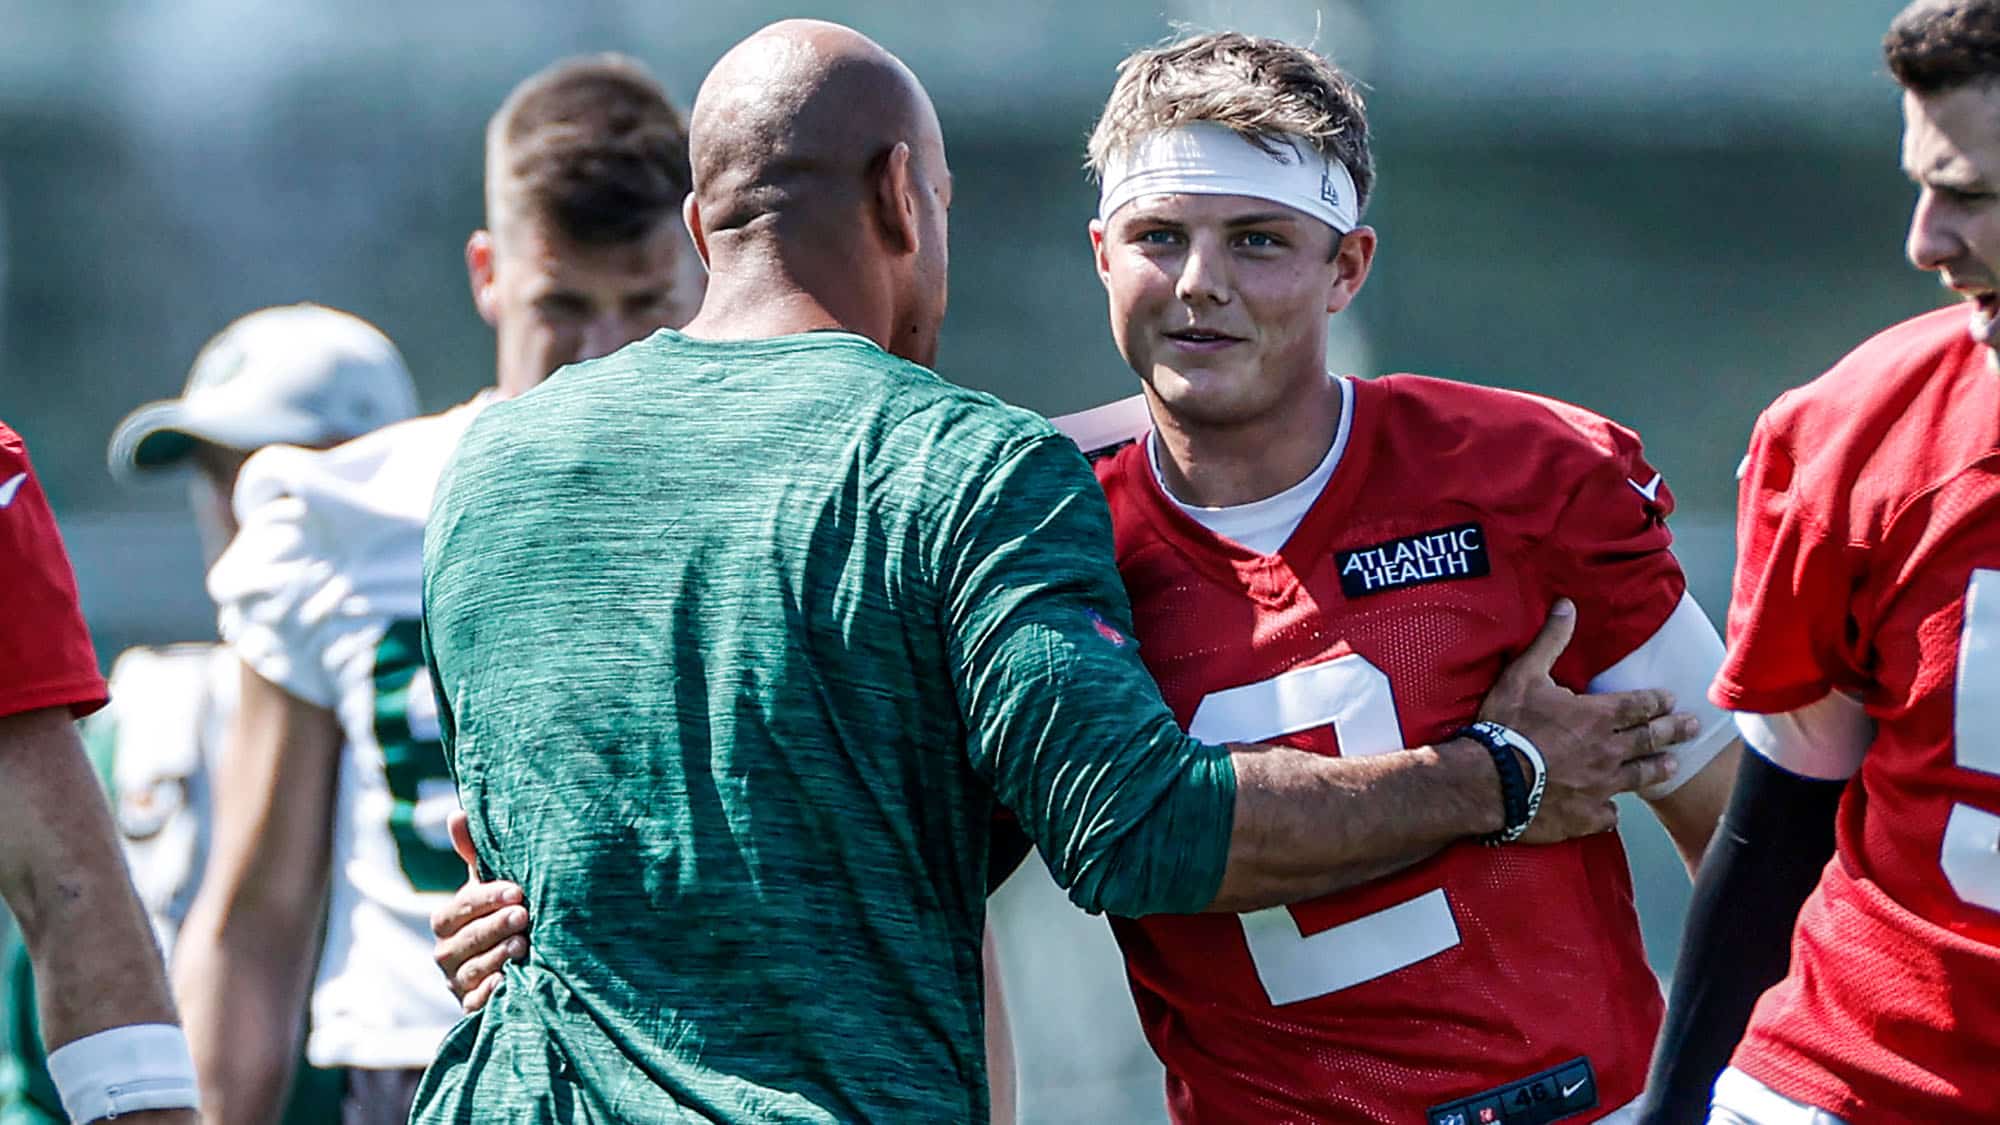 Robert Saleh and Zach Wilson highlight takeaways from NY Jets training camp practice.